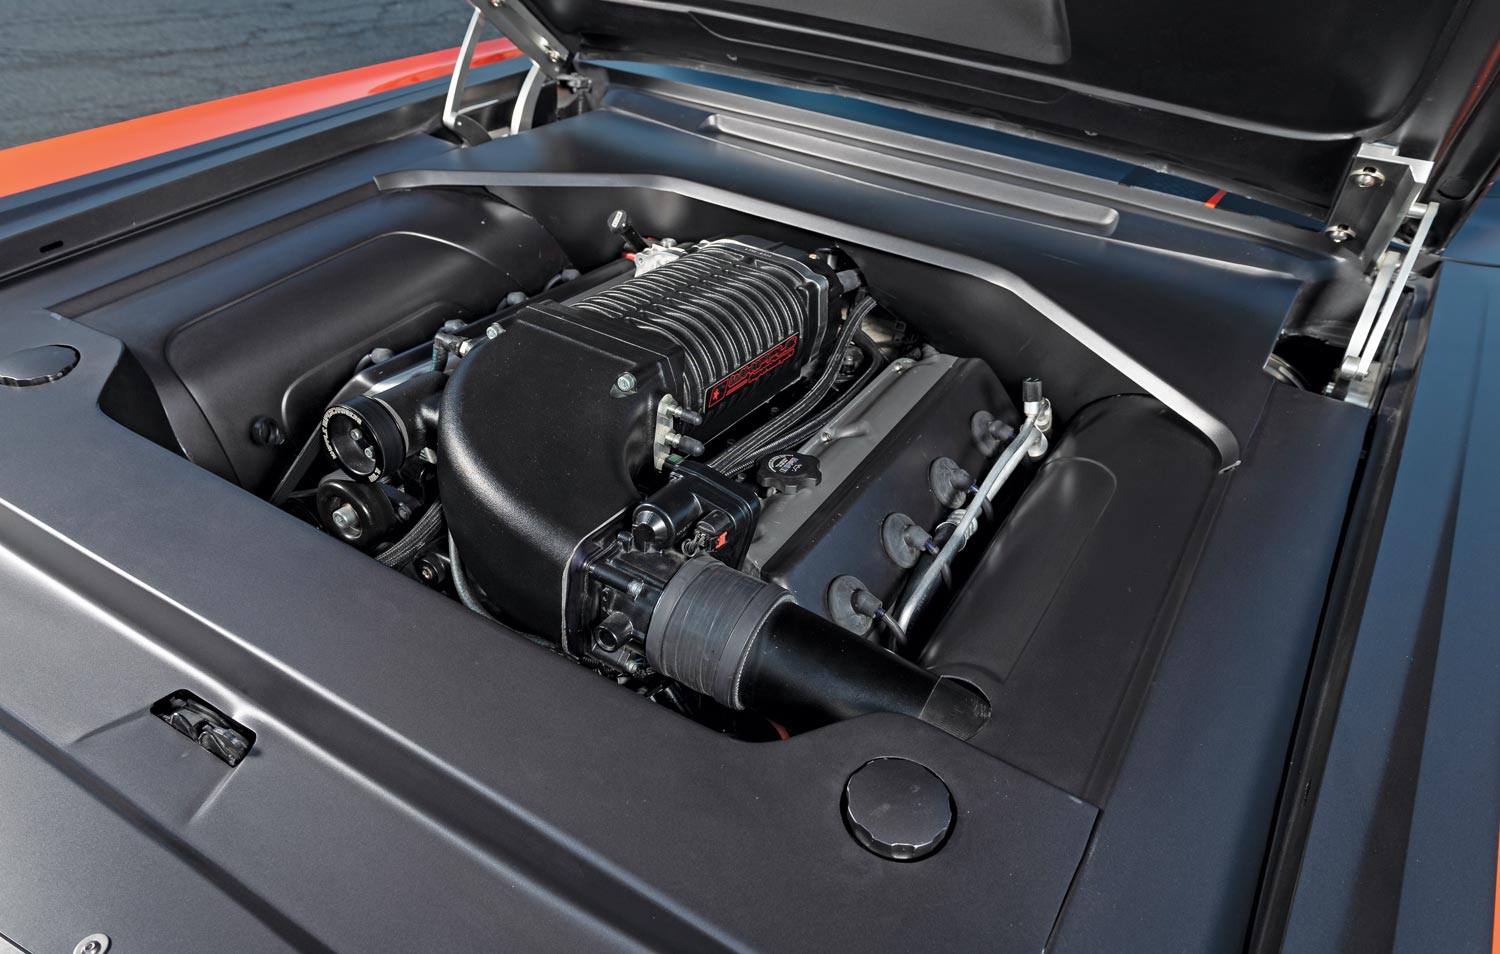 Engine in a 1969 Dodge Super Bee